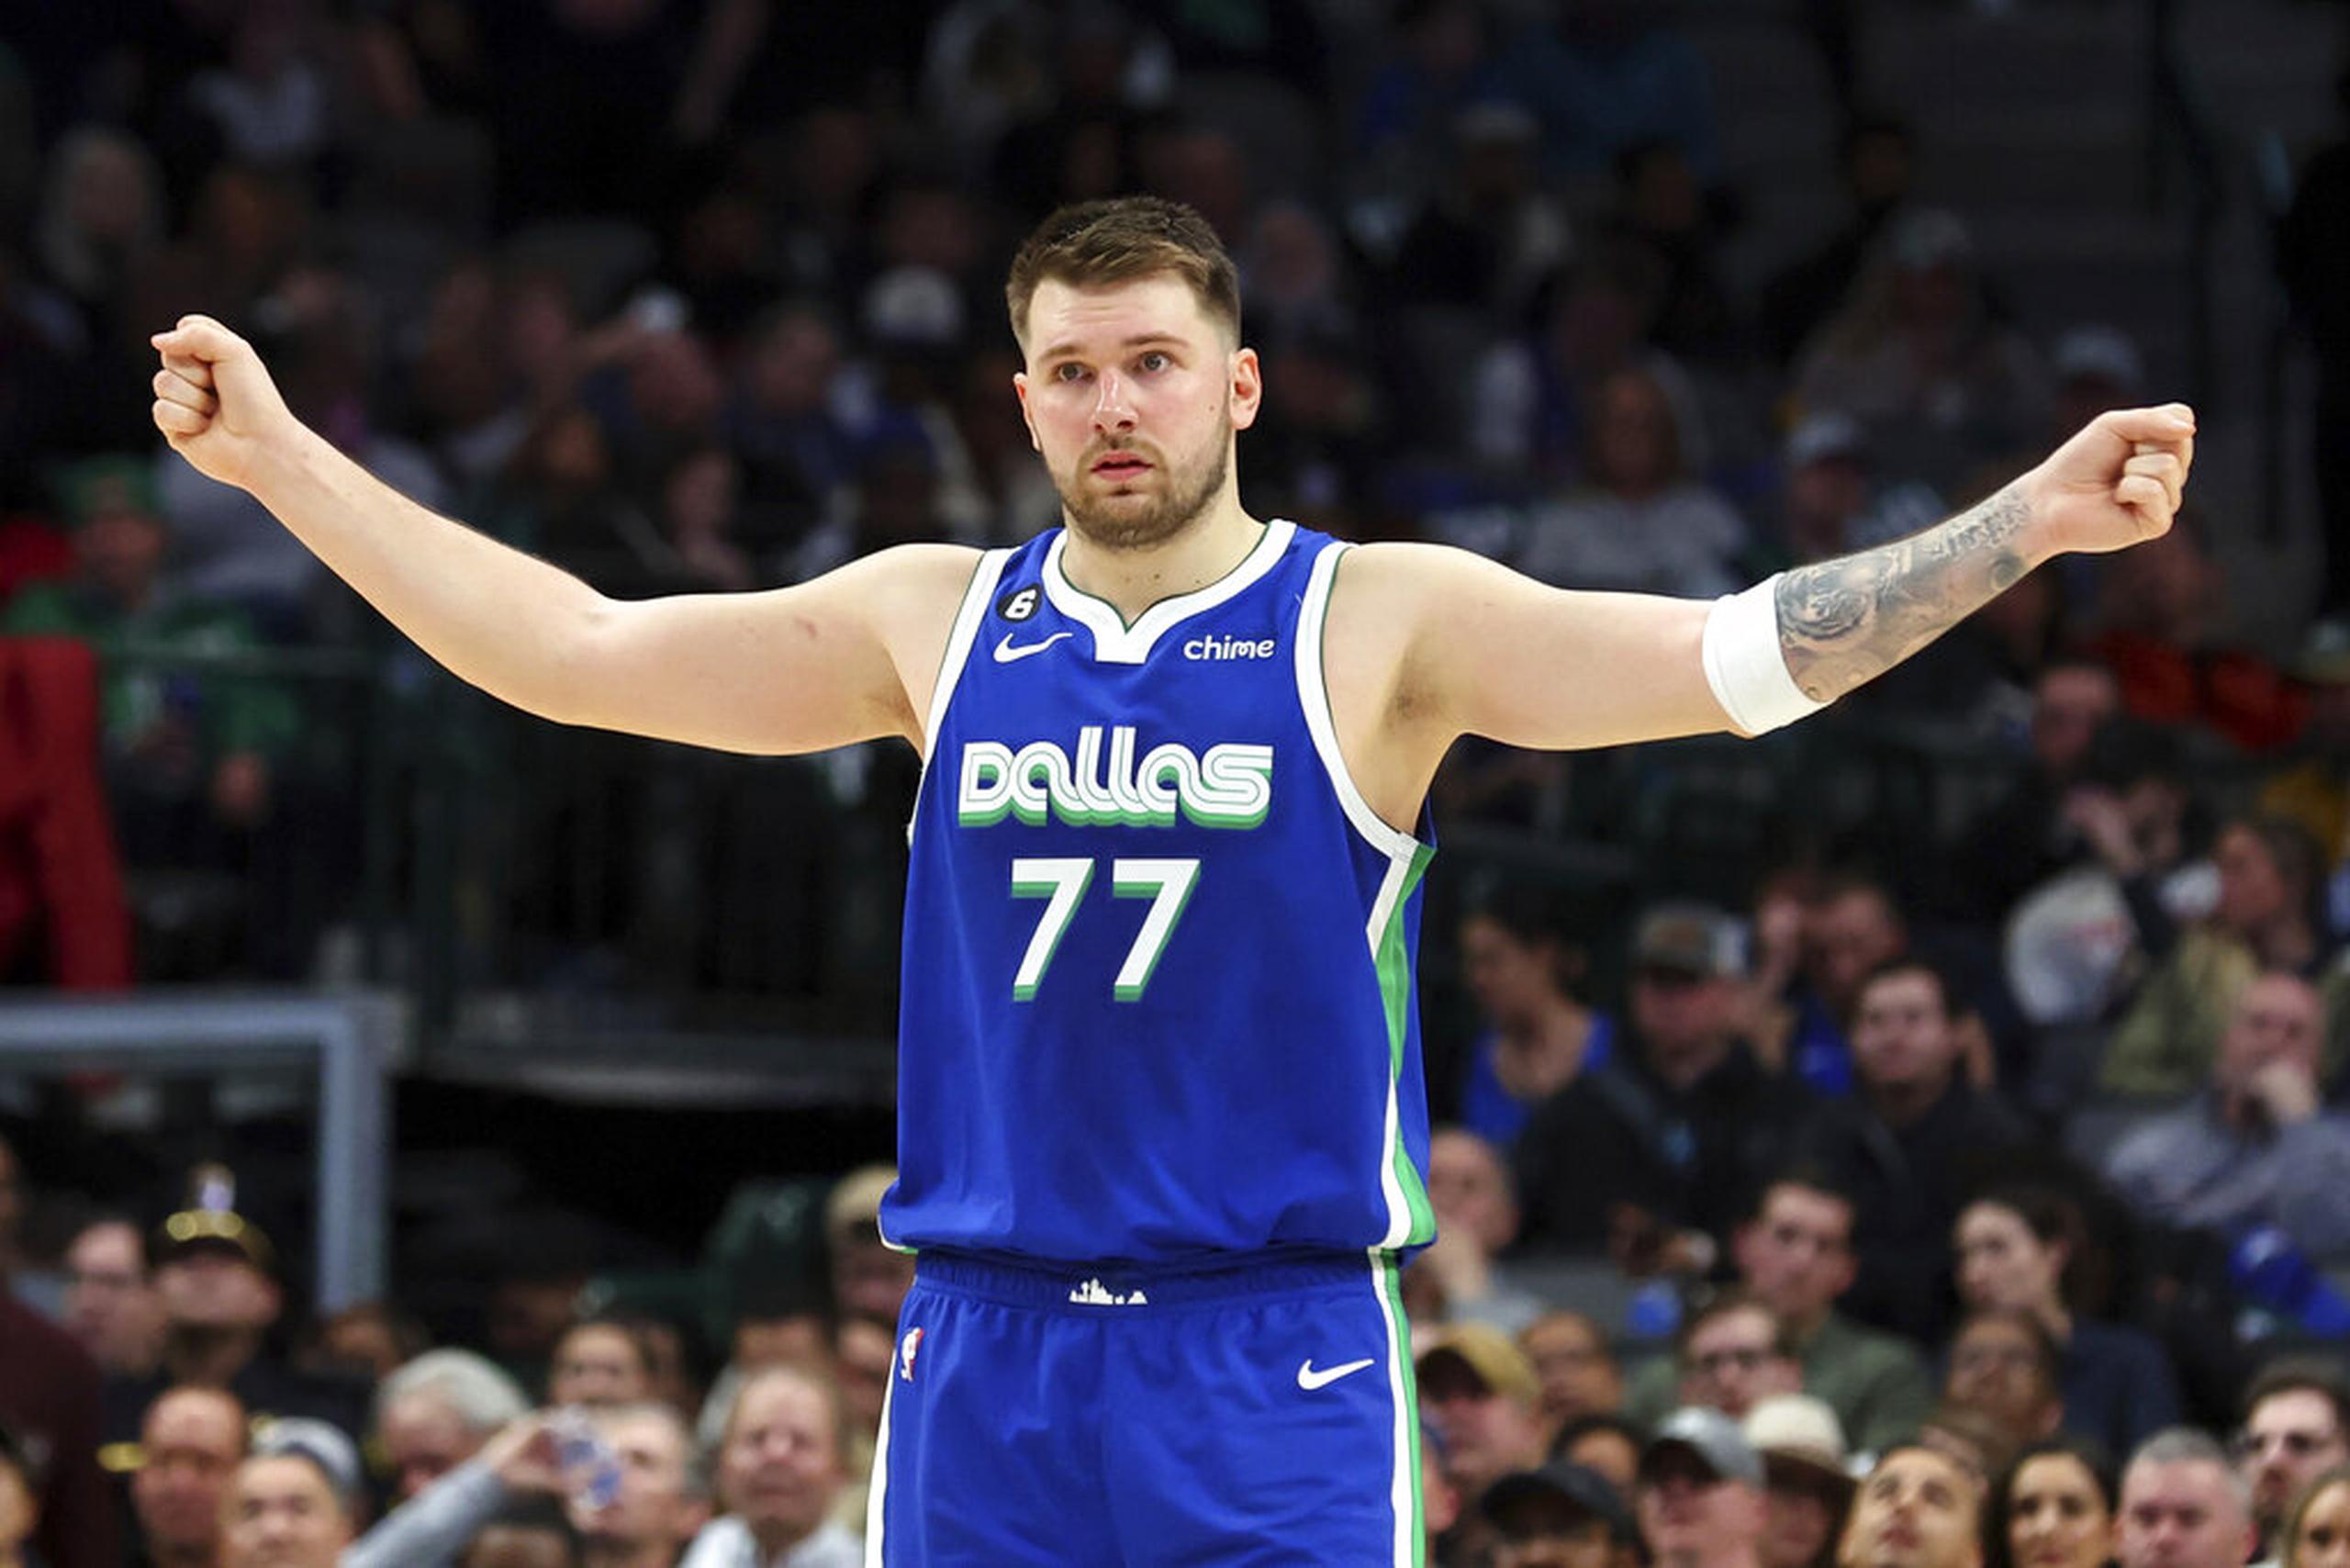 Luka Doncic has already scored over 8,500 points and won't turn 24 until the end of February.